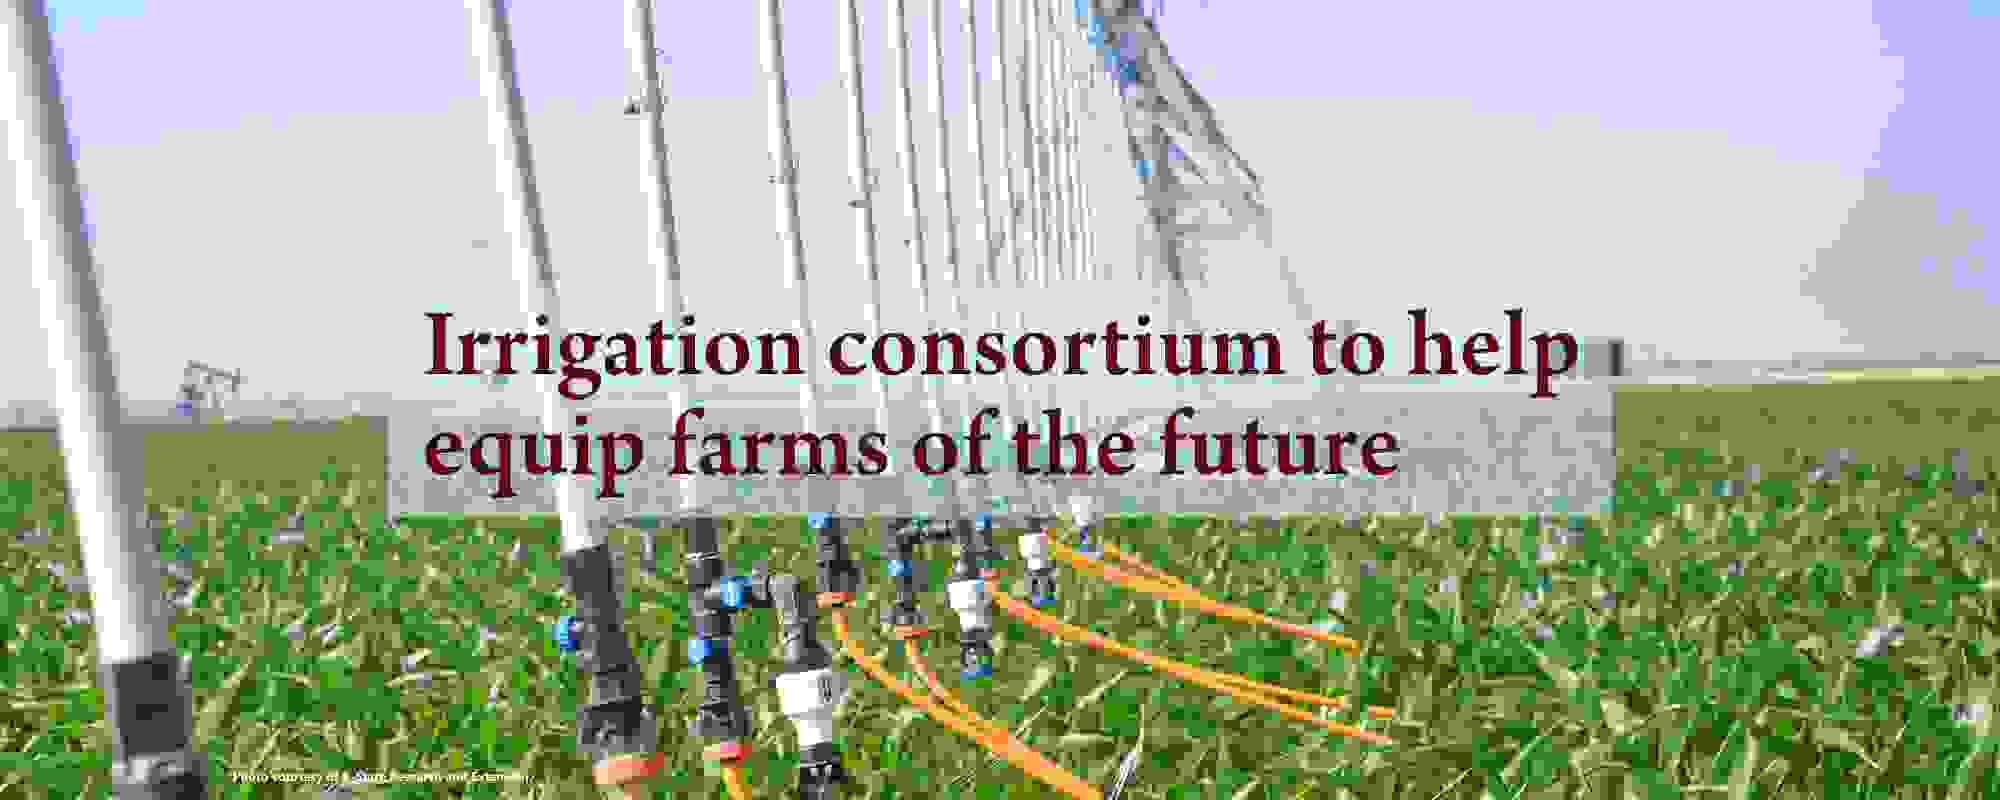 Irrigation consortium to help equip farms of the future